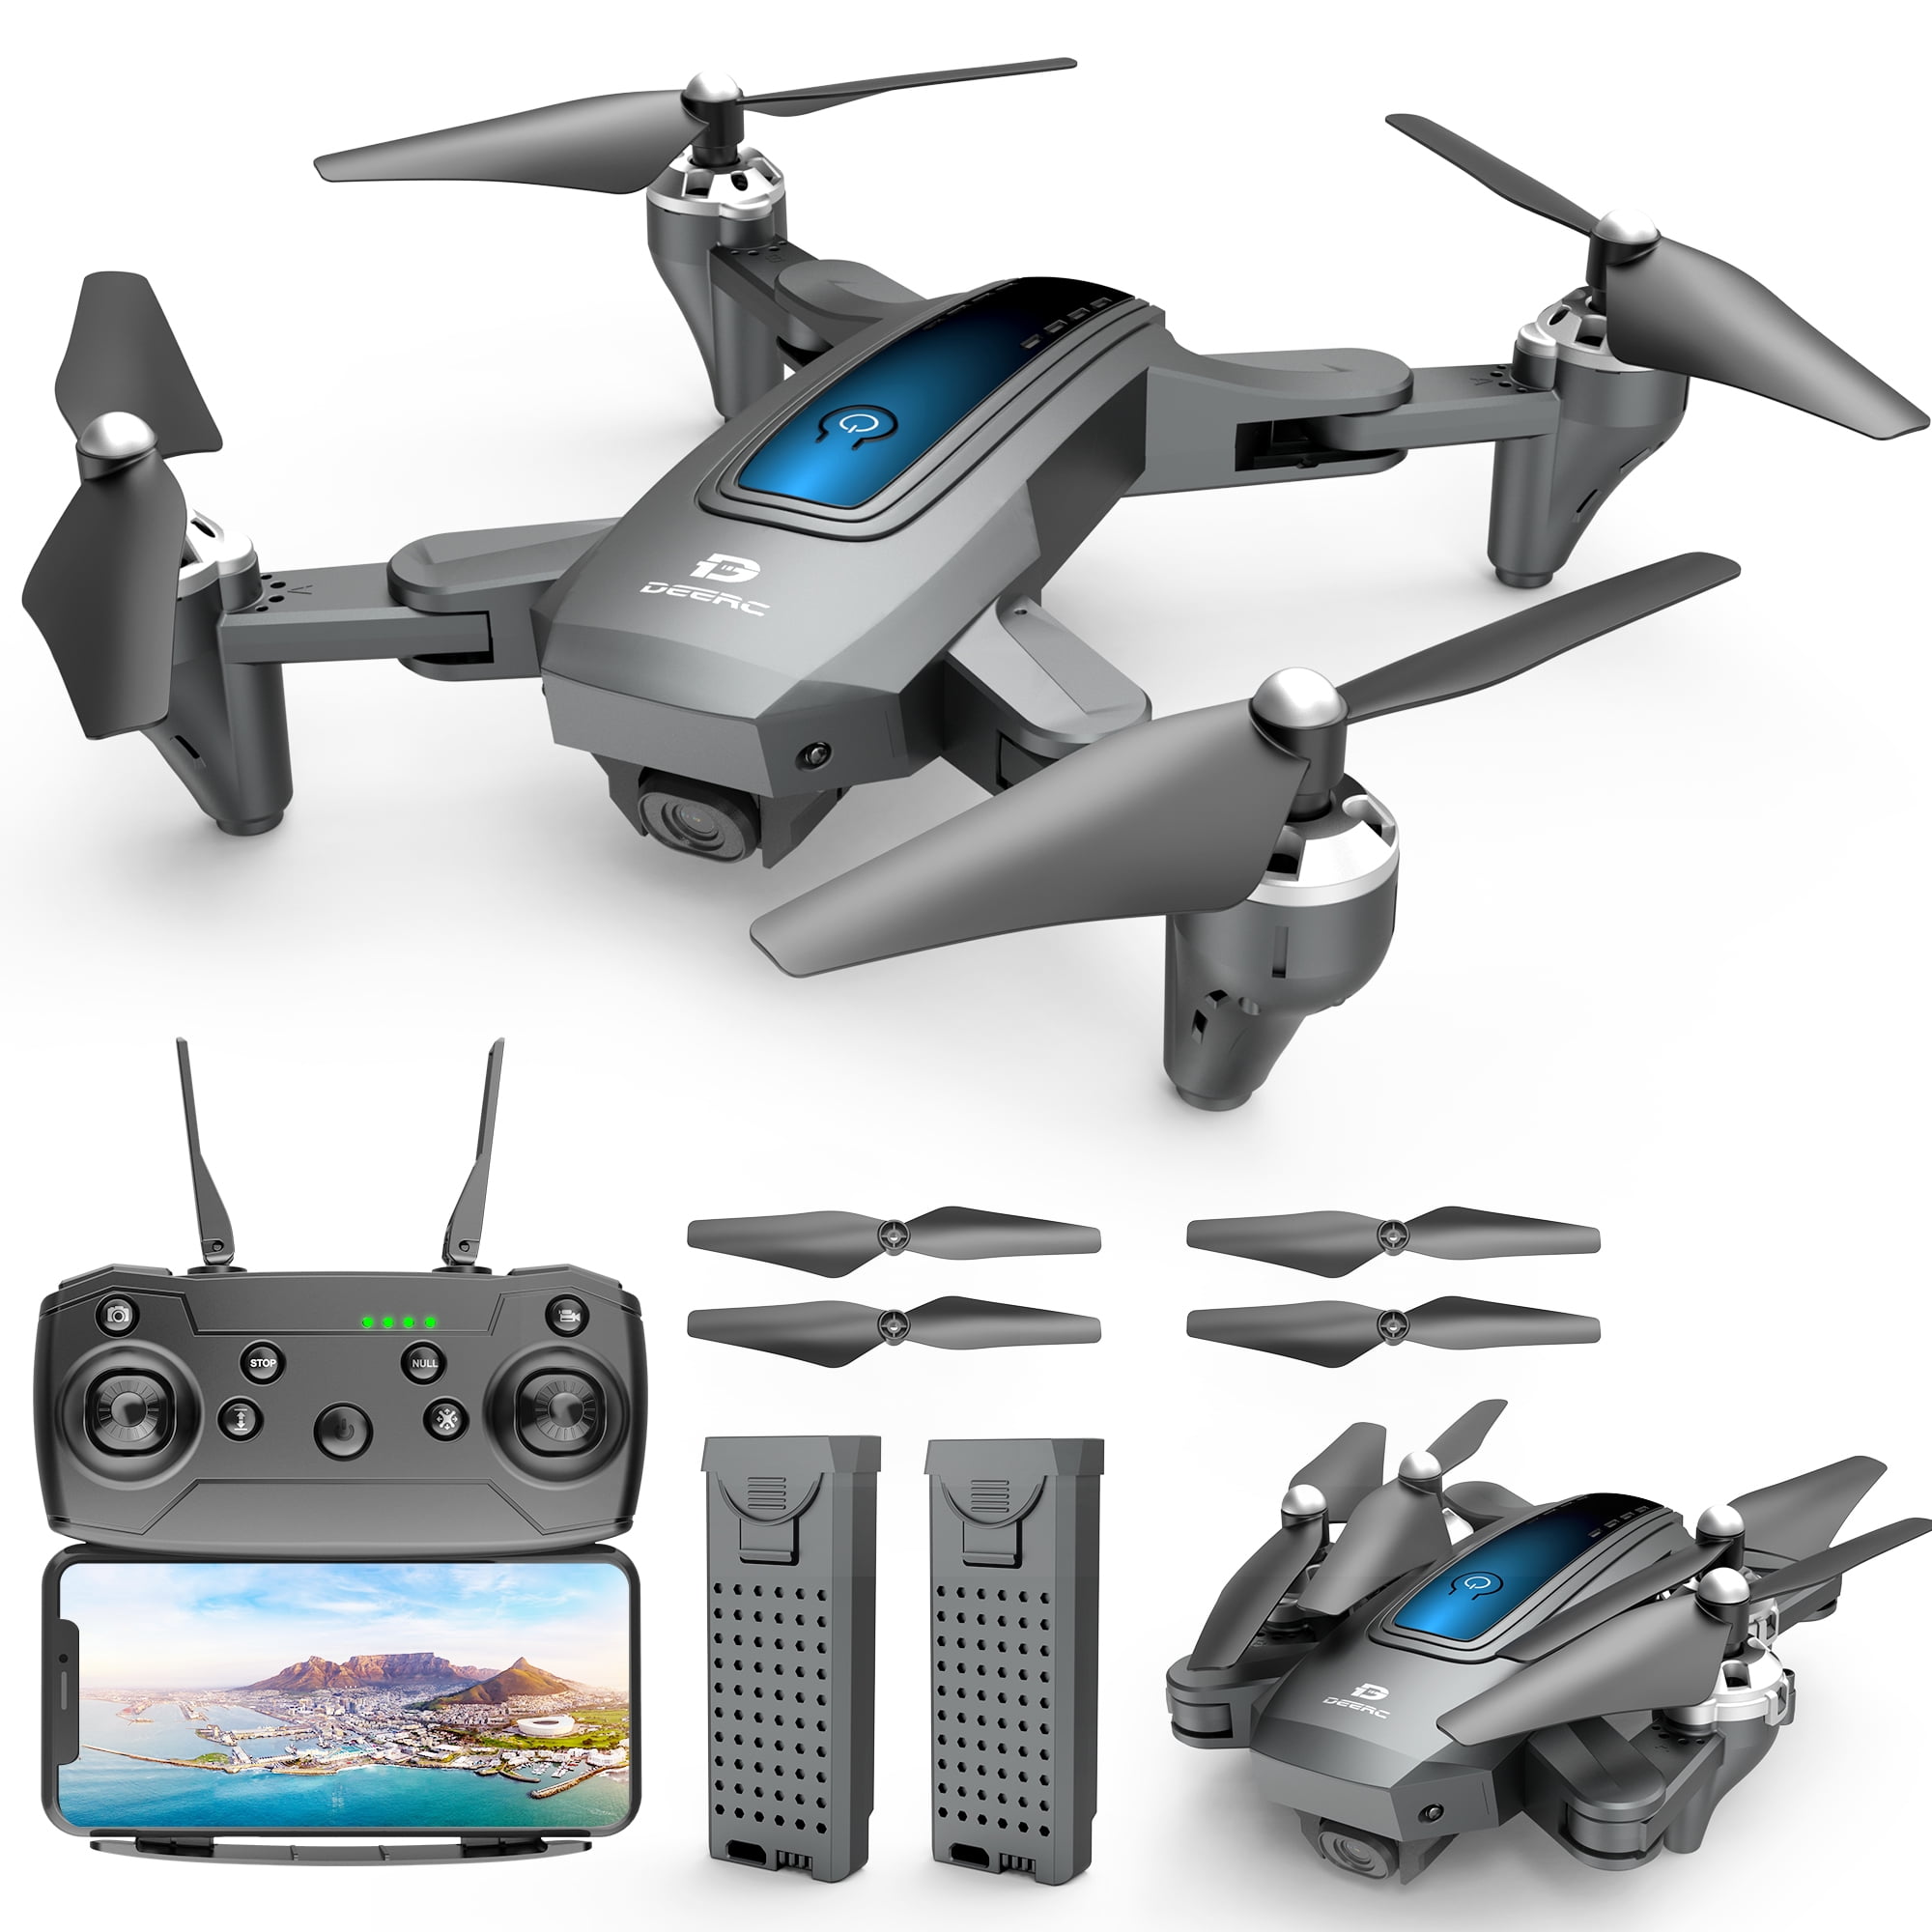  Foldable FPV Drone With 1080P HD FPV Camera, Mini Drone with RC  Aircraft Quadcopter Headless Mode Altitude Hold and Obstacle Avoidance,  Carrying Case for Beginners Adults travel : Toys & Games